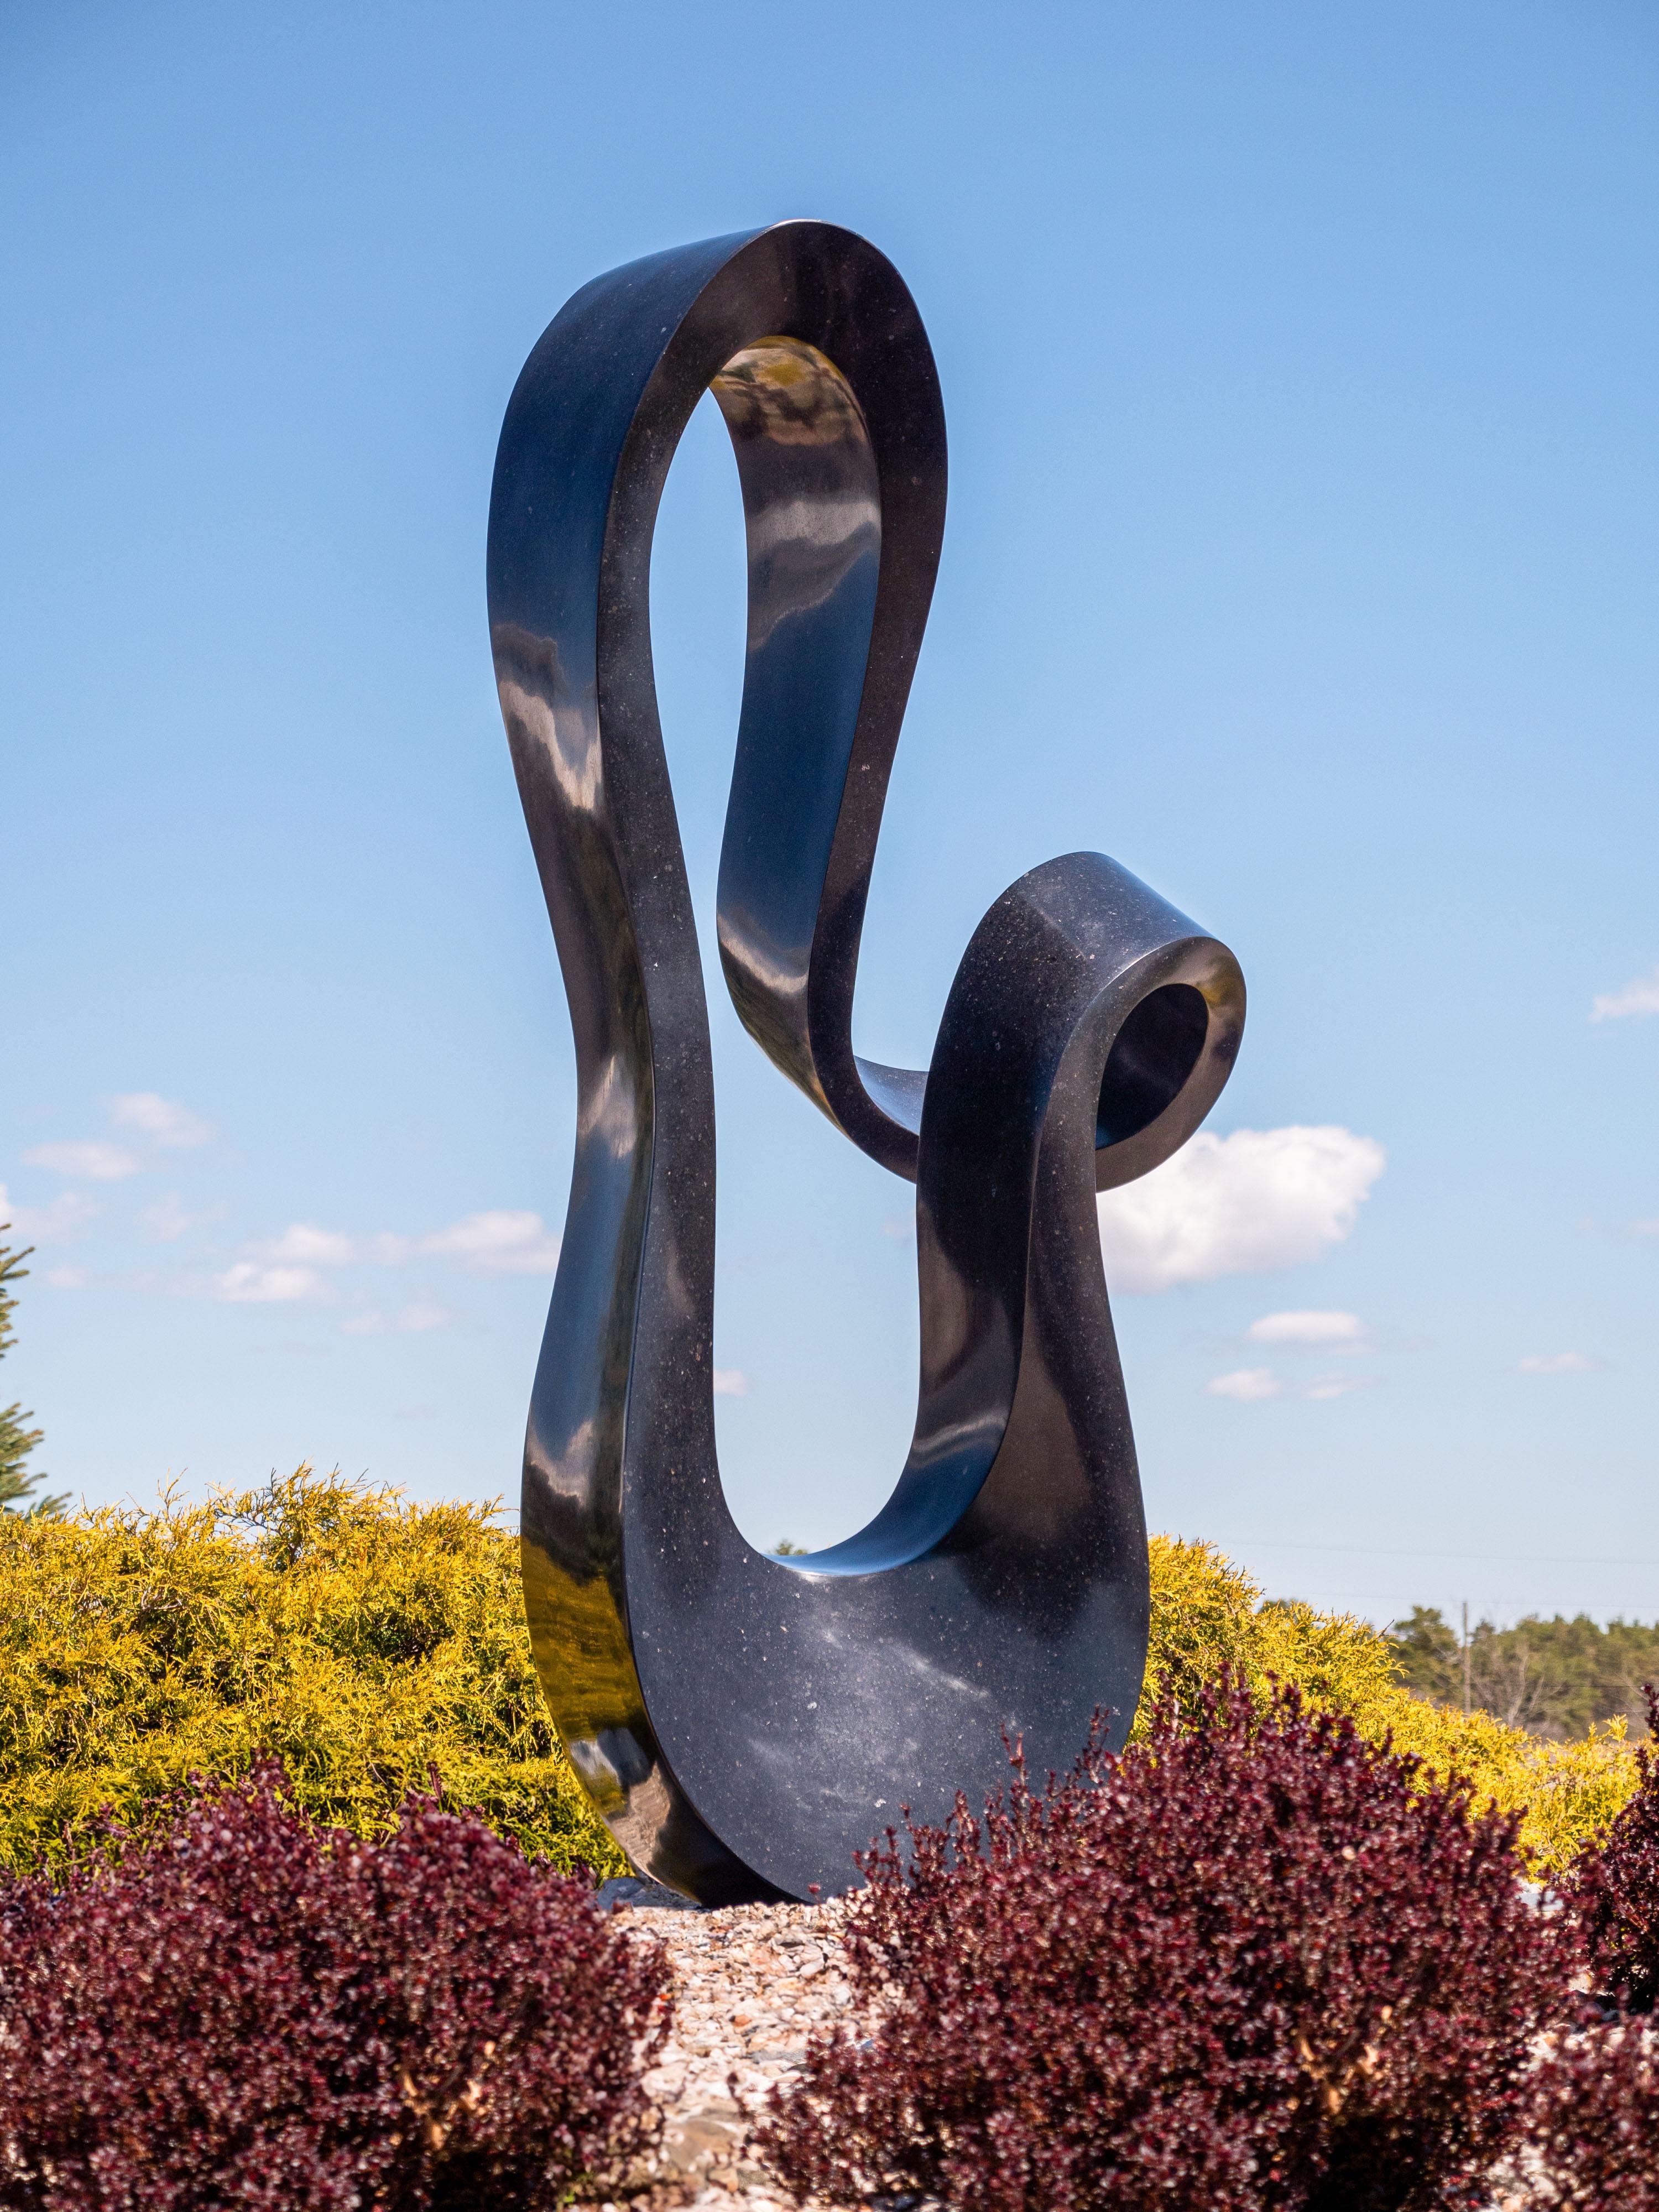 Signature No 5 - large, smooth, black granite, outdoor, abstract, sculpture - Sculpture by Jeremy Guy